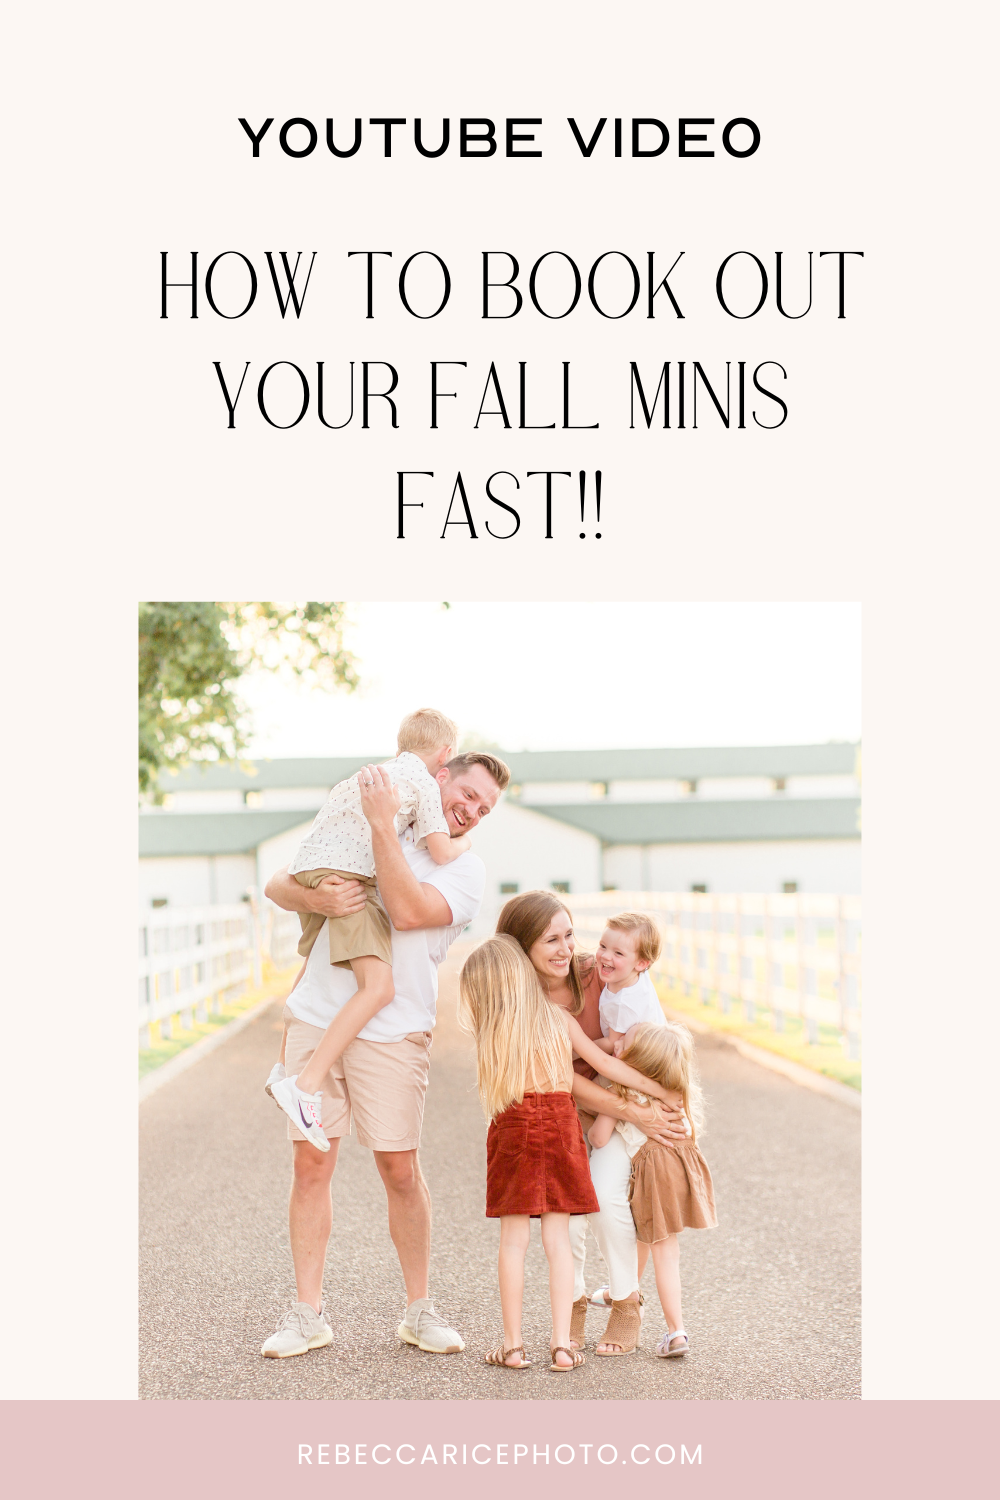 NEW YouTube Video! How to book mini sessions FAST! Watch live on the blog or YouTube TODAY!! -rebeccaricephoto.com